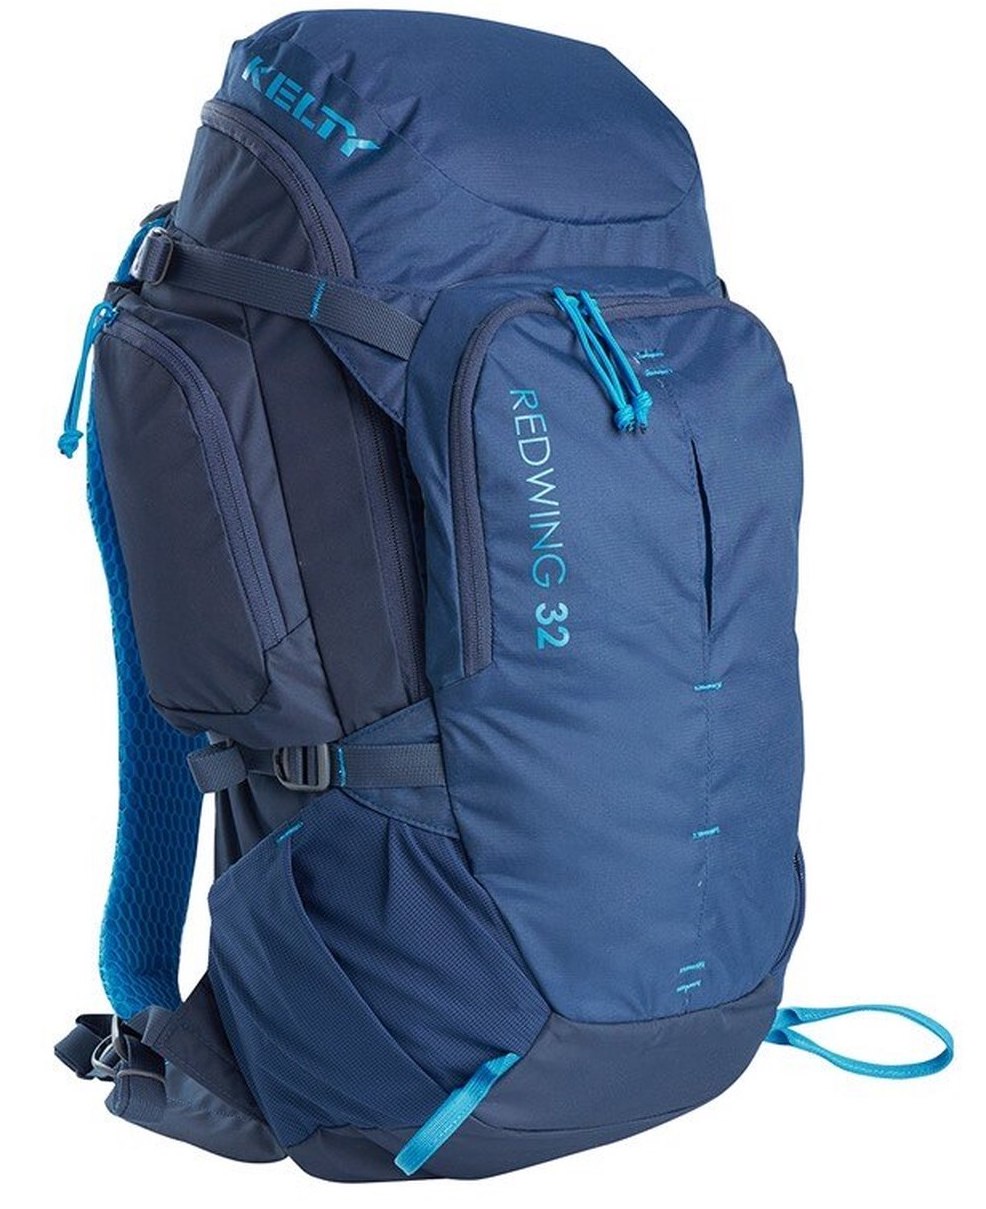 Kelty Redwing 32L Adventure Backpacking Pack